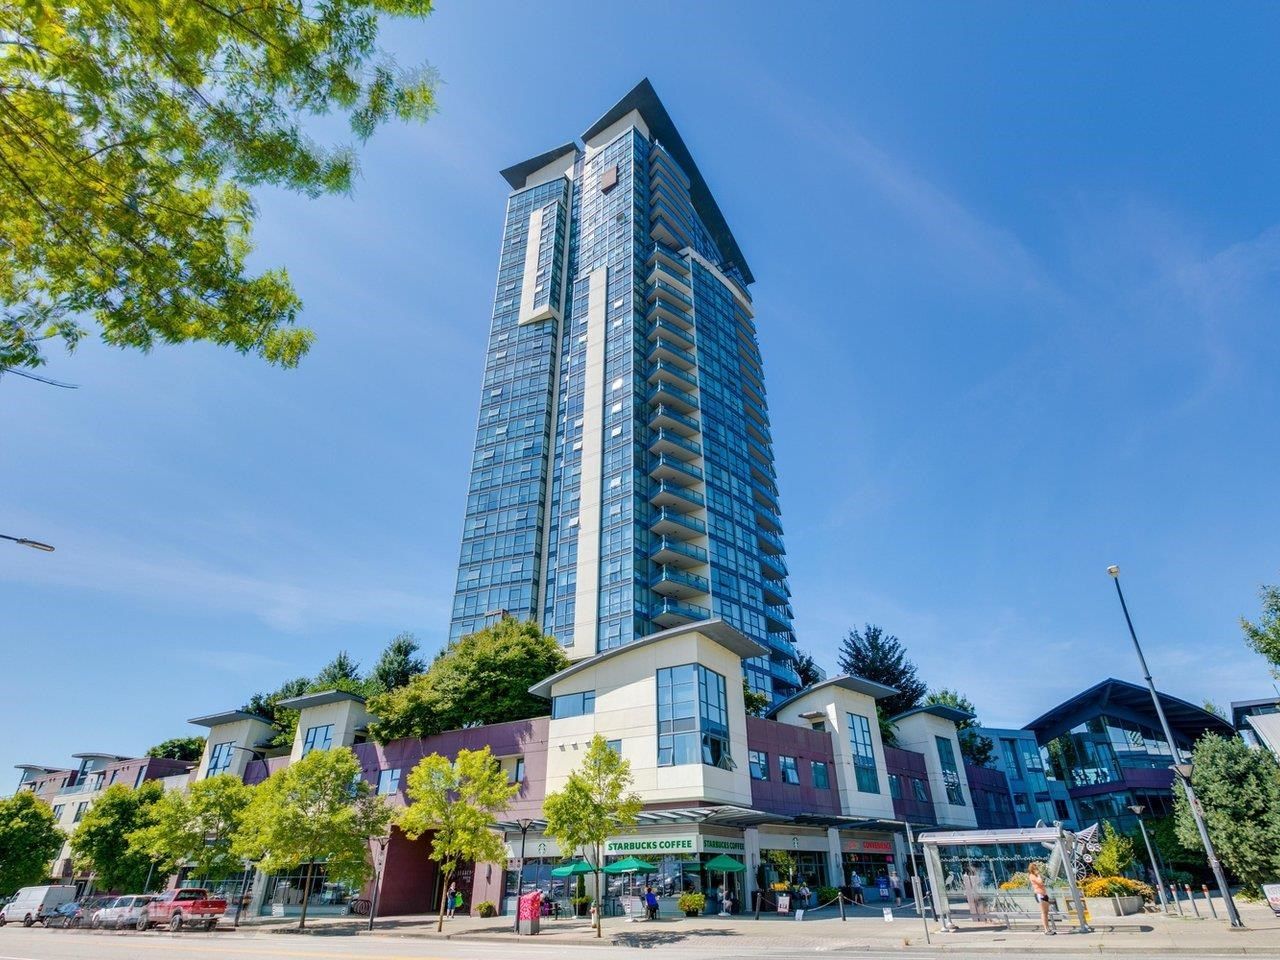 We have sold a property at 2603 2225 HOLDOM AVE in Burnaby